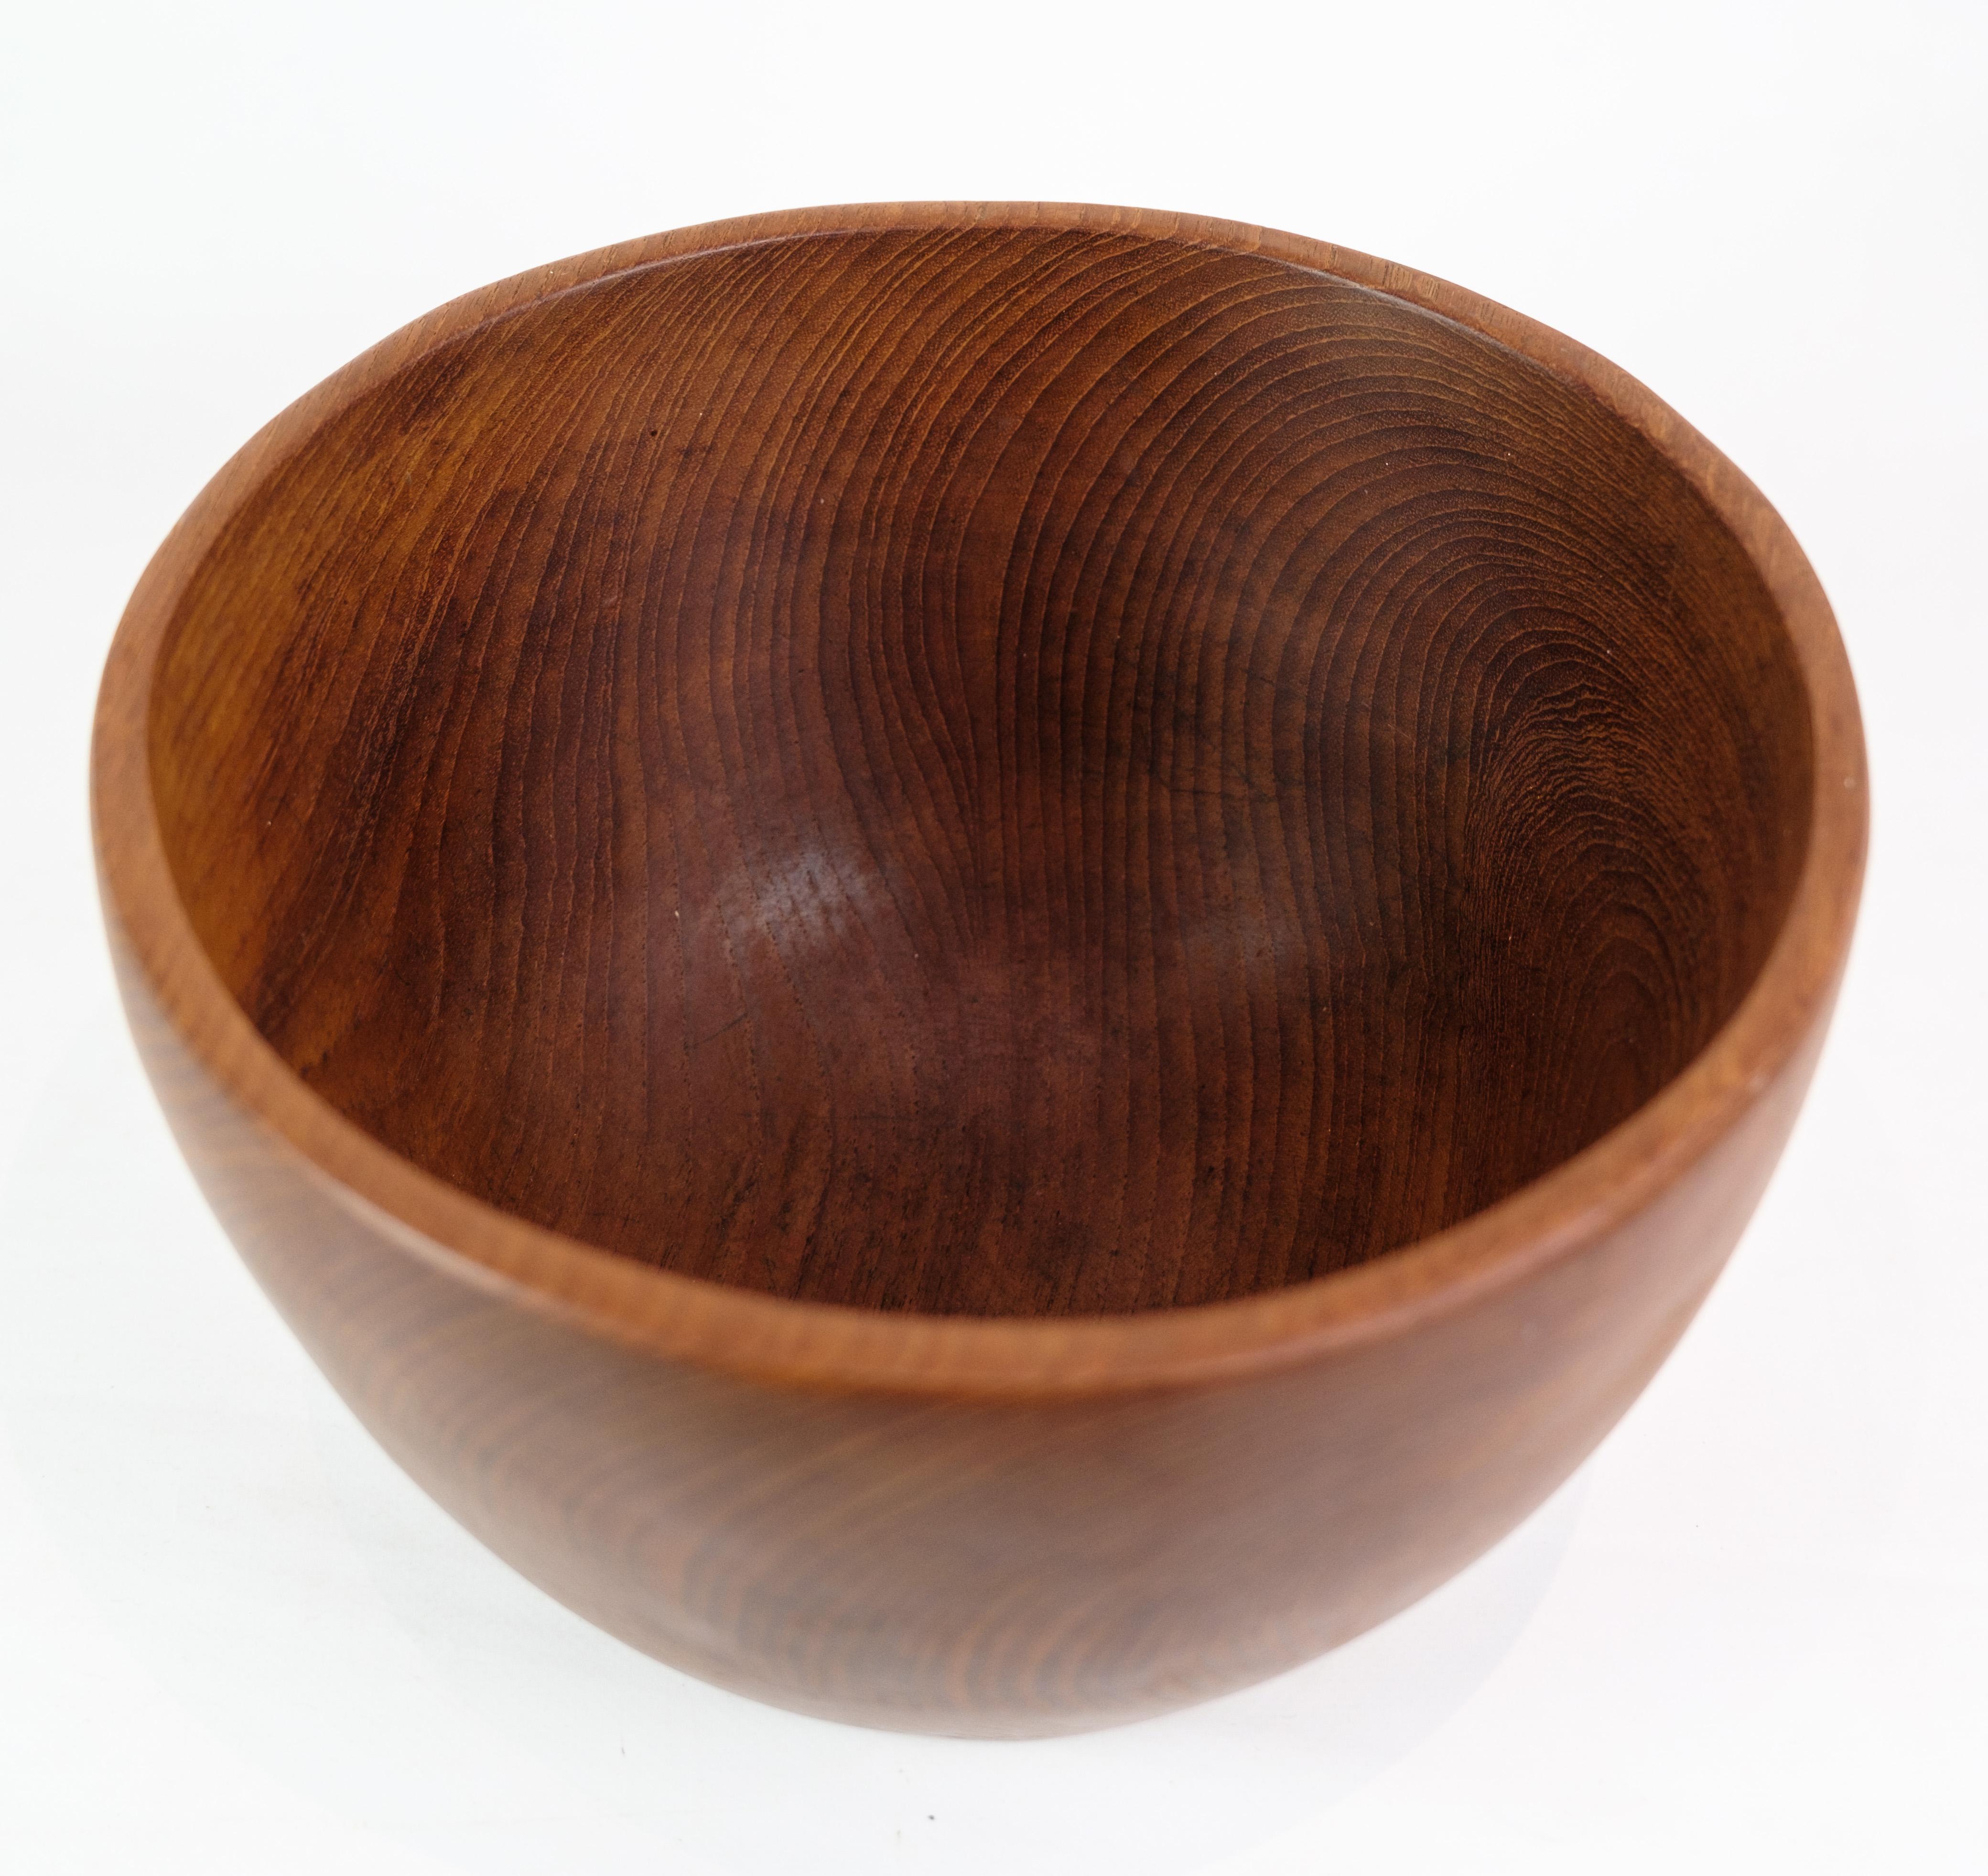 Bowl Made In Teak, Danish Design From 1960s In Good Condition For Sale In Lejre, DK